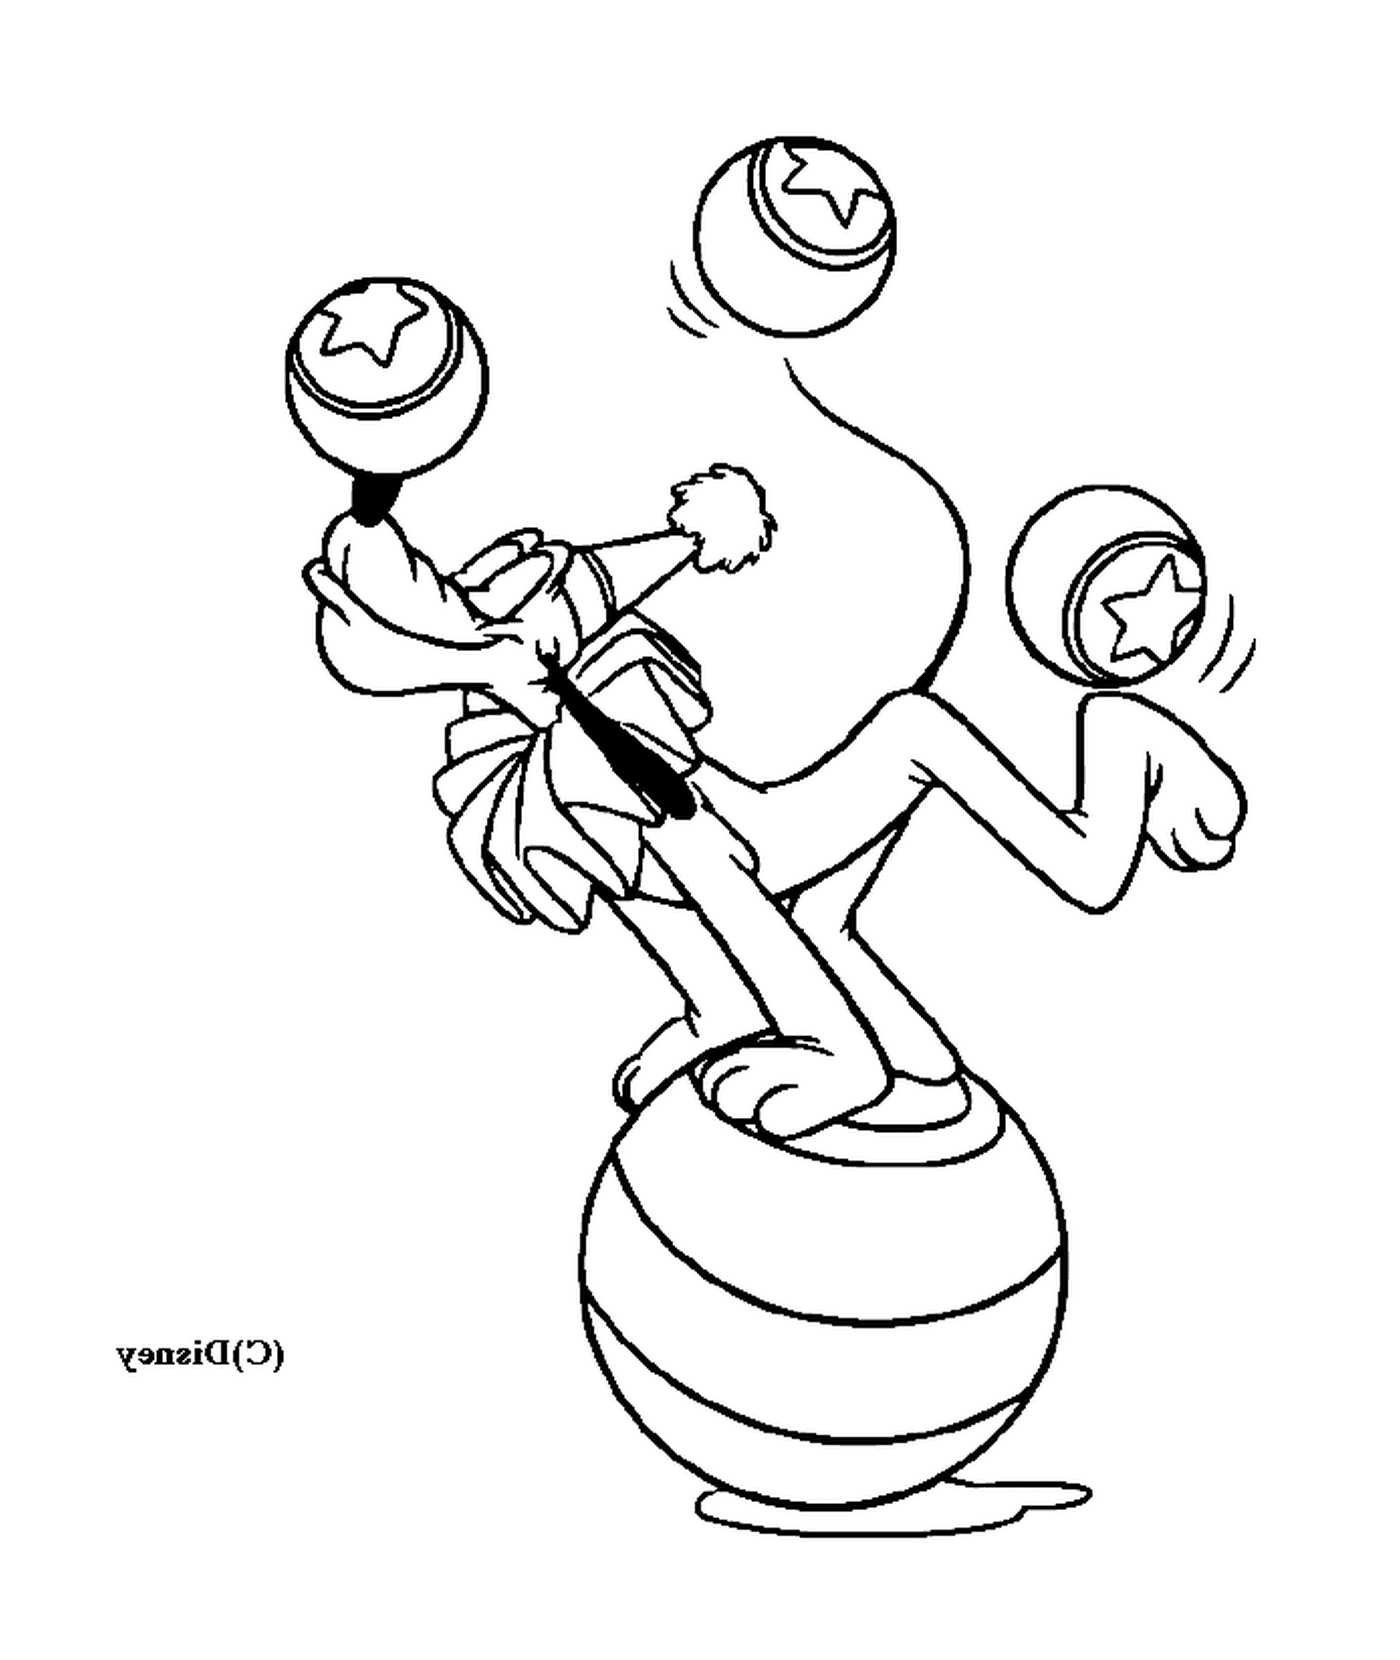  No one juggling on a ball 